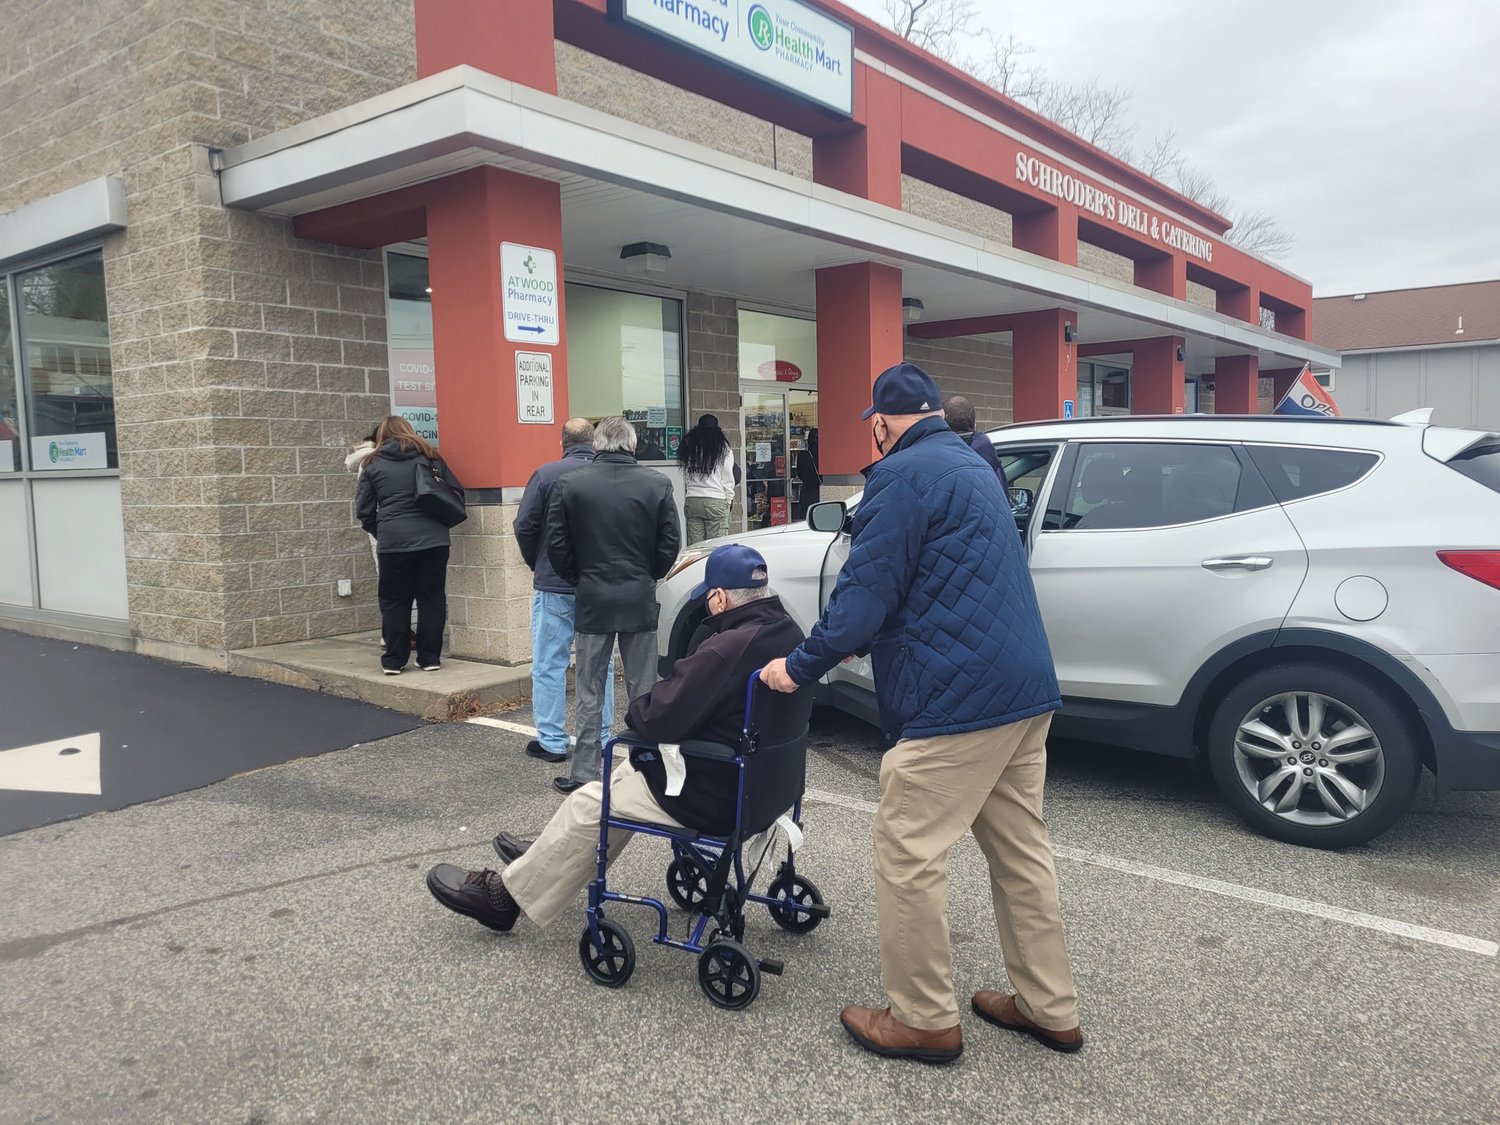 COVID QUEUE: Vincent Palumbo stood behind his brother-in-law Frederick Cardente’s wheelchair Monday, waiting in line for a vaccine booster shot.